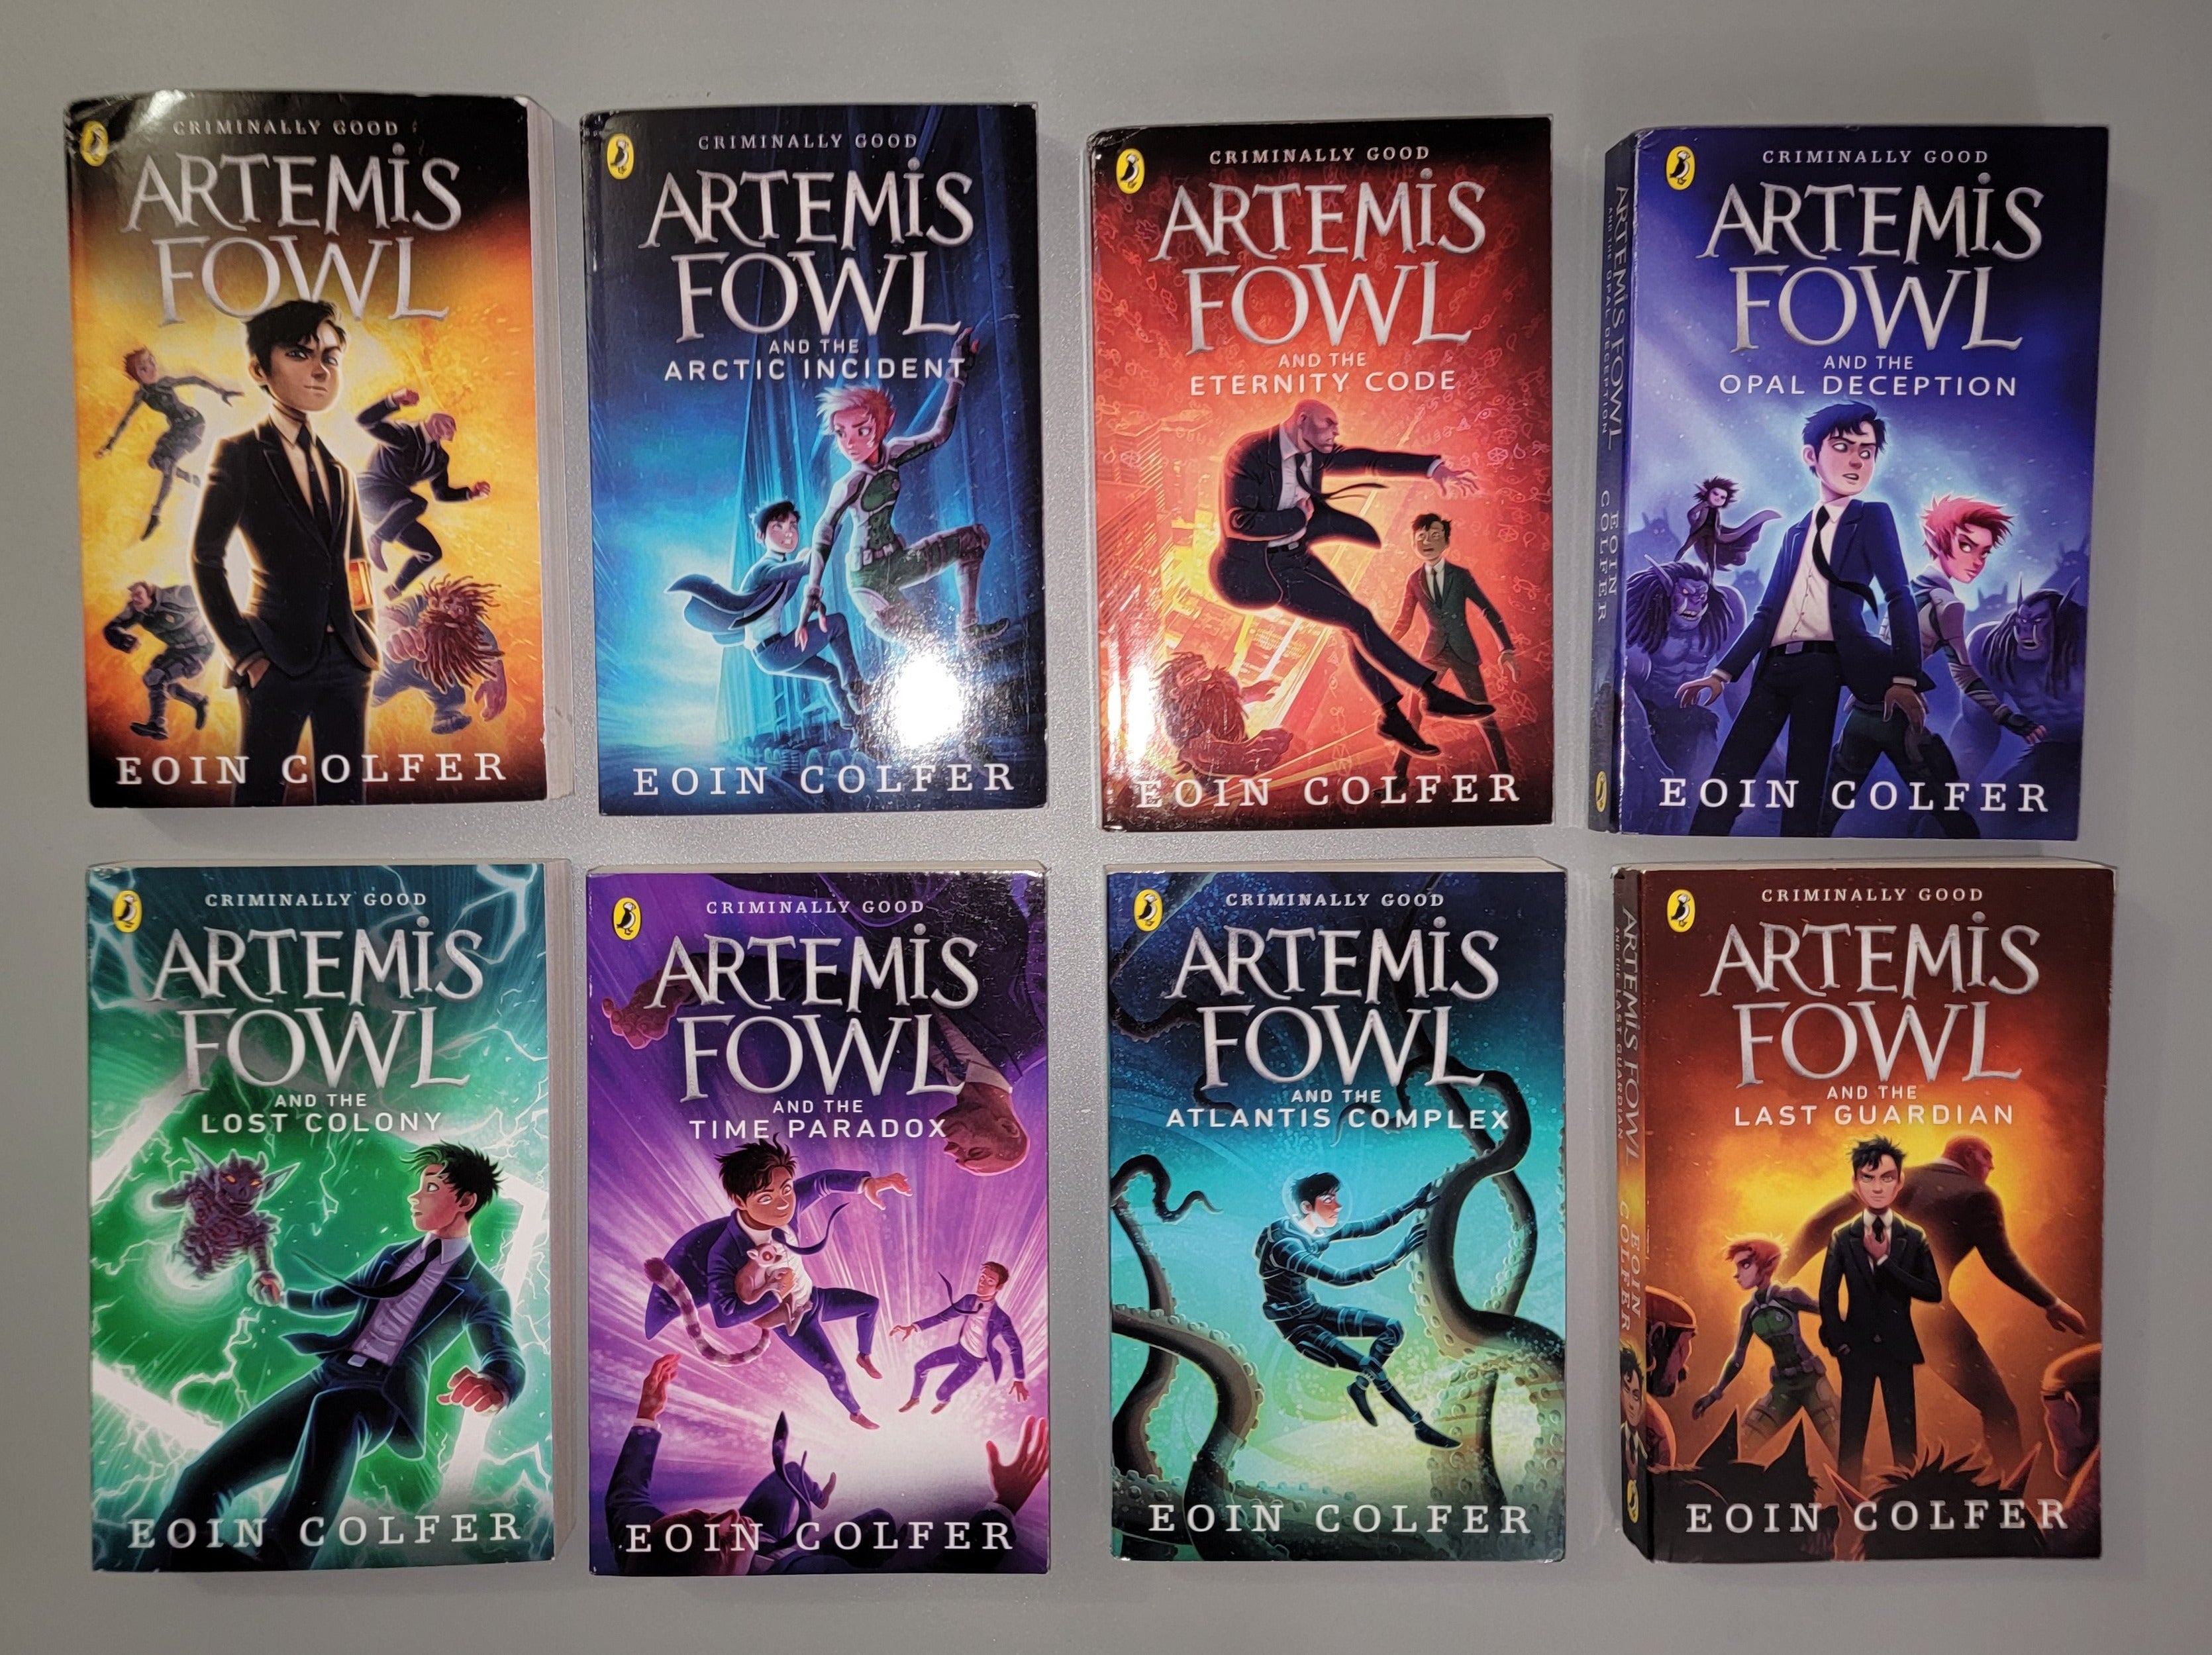 Artemis Fowl and the Time Paradox by Eoin Colfer - Penguin Books